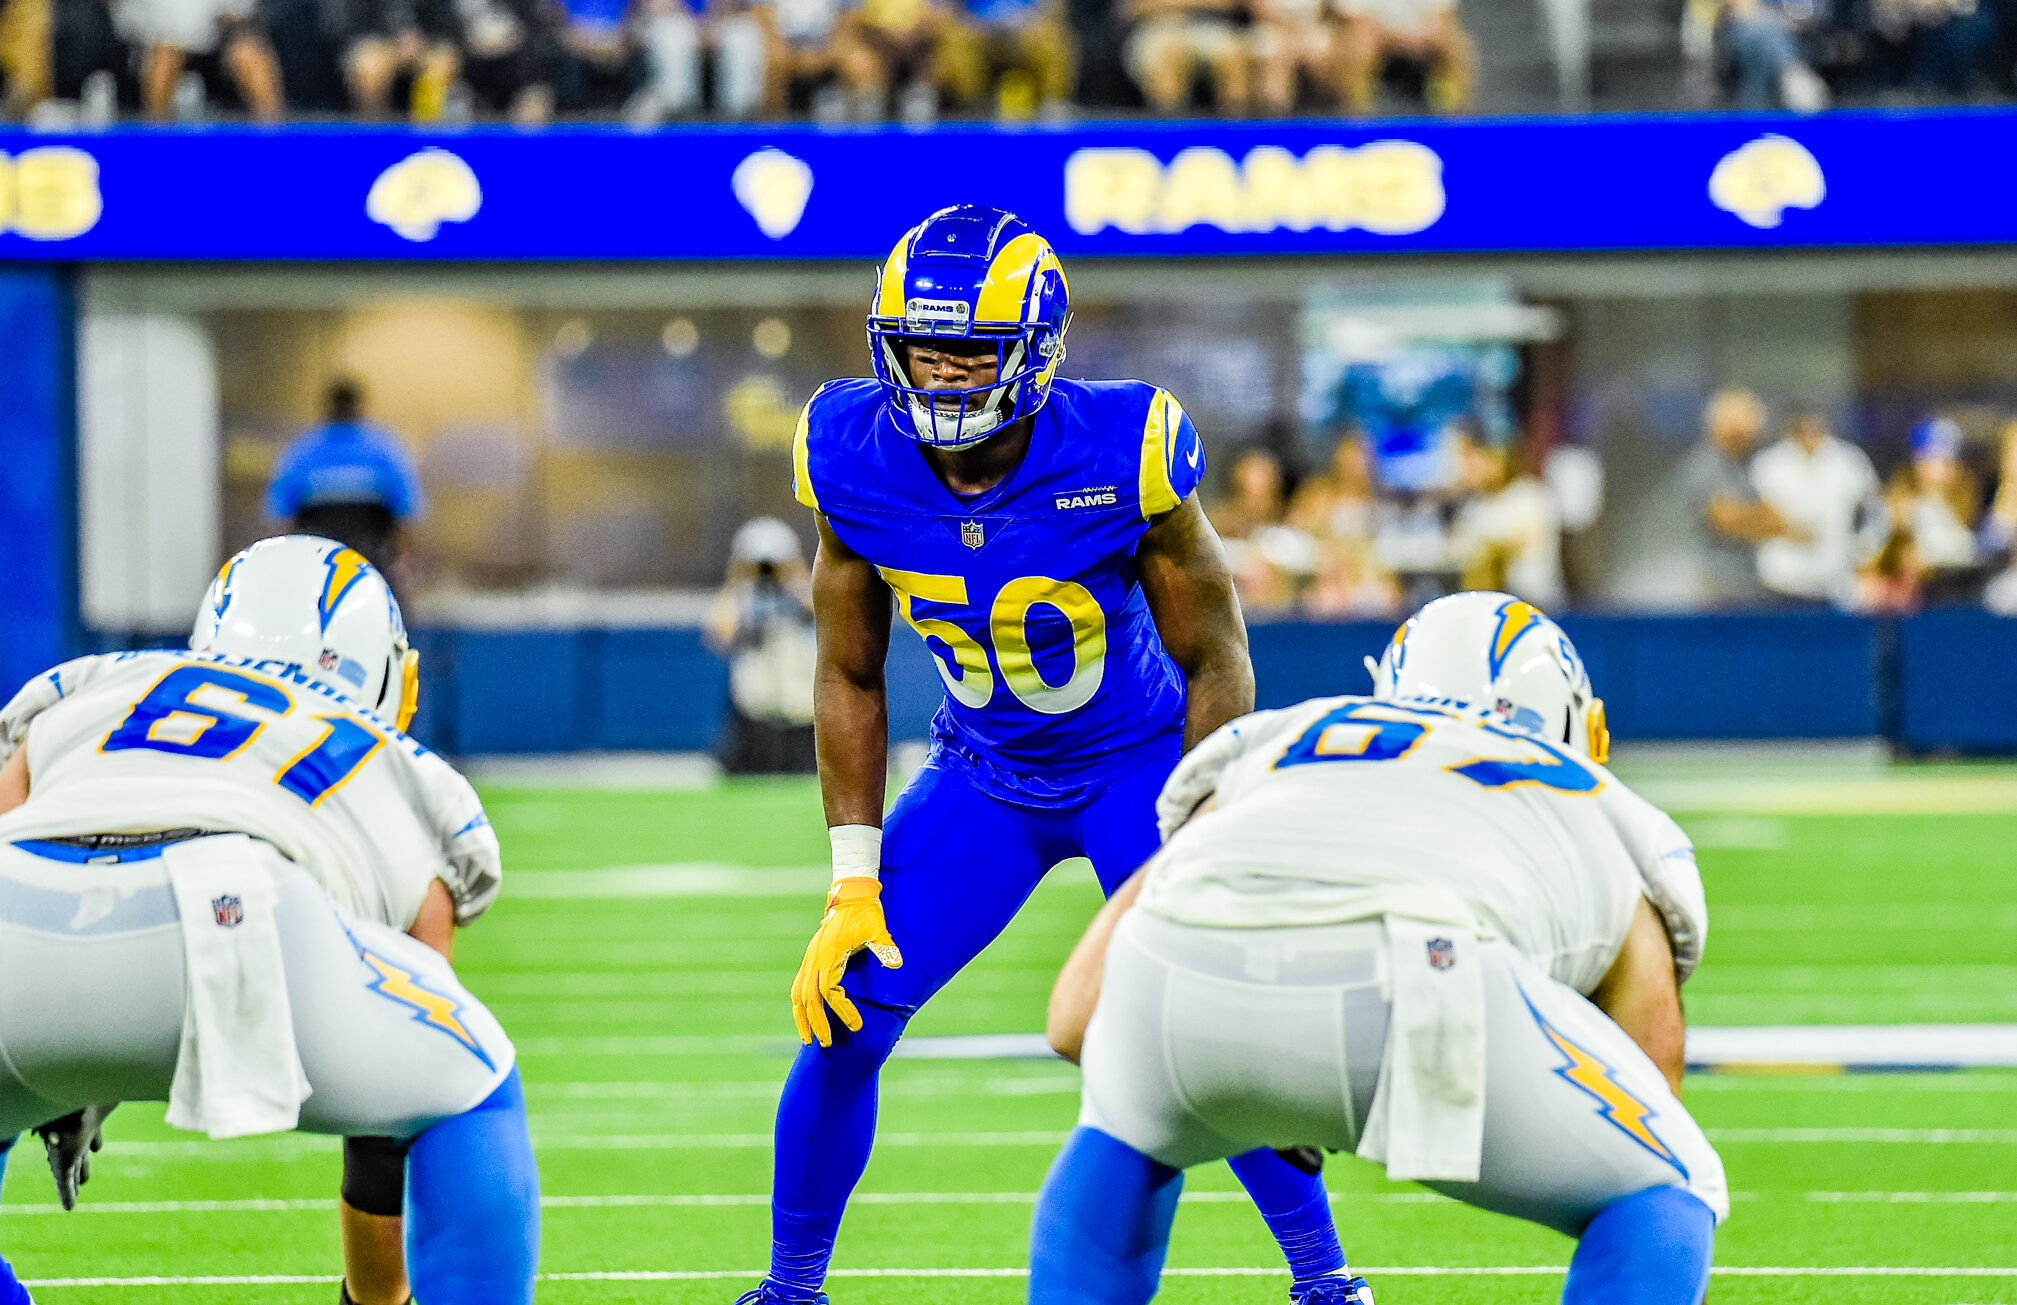 Rams and Chargers: What's in a uniform? – News4usonline